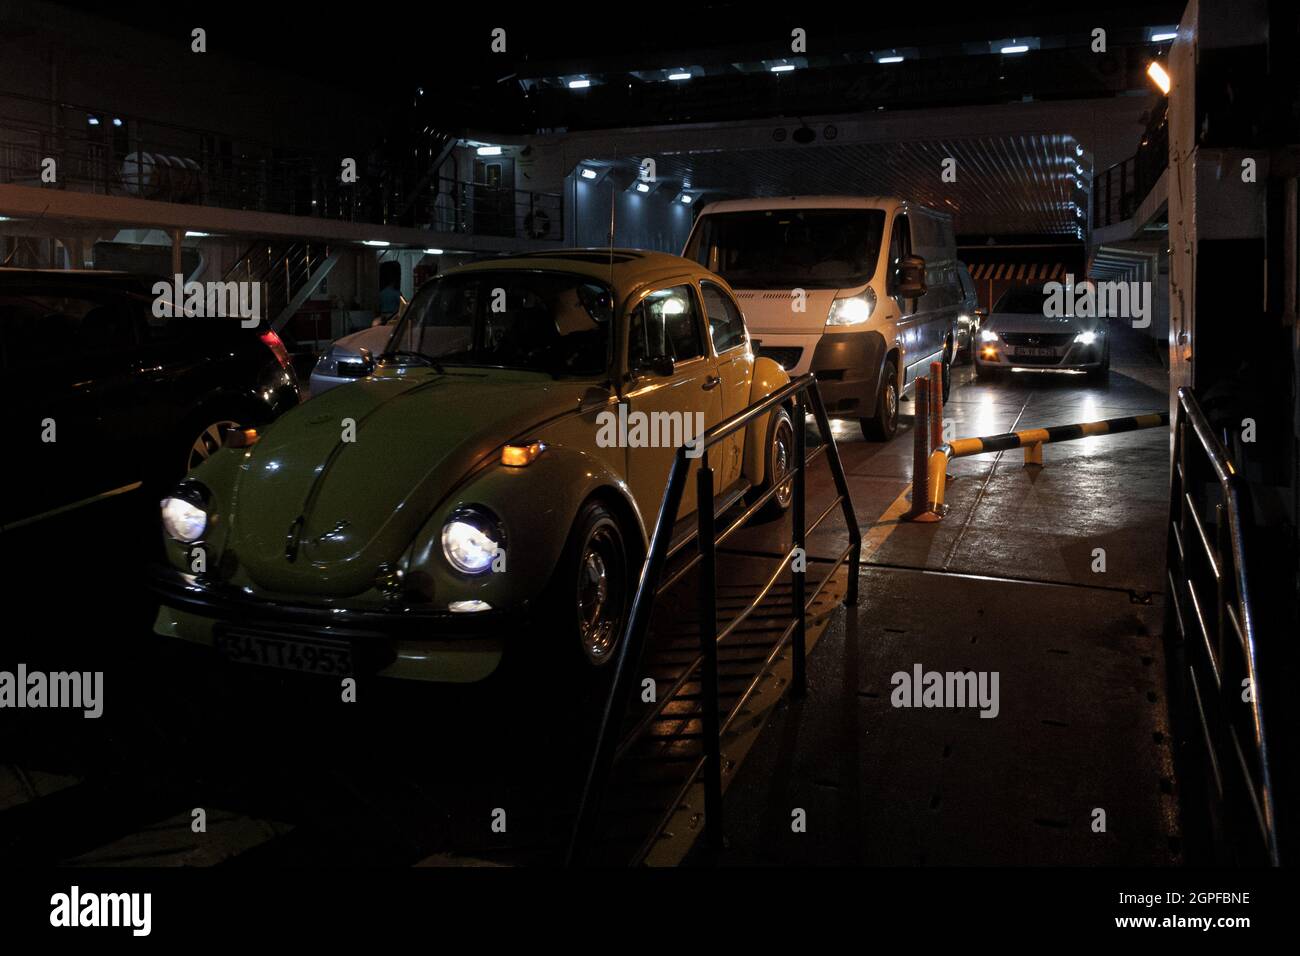 Istanbul, Turkey; May 25th 2013: Cars disembarking from a ferry. Stock Photo